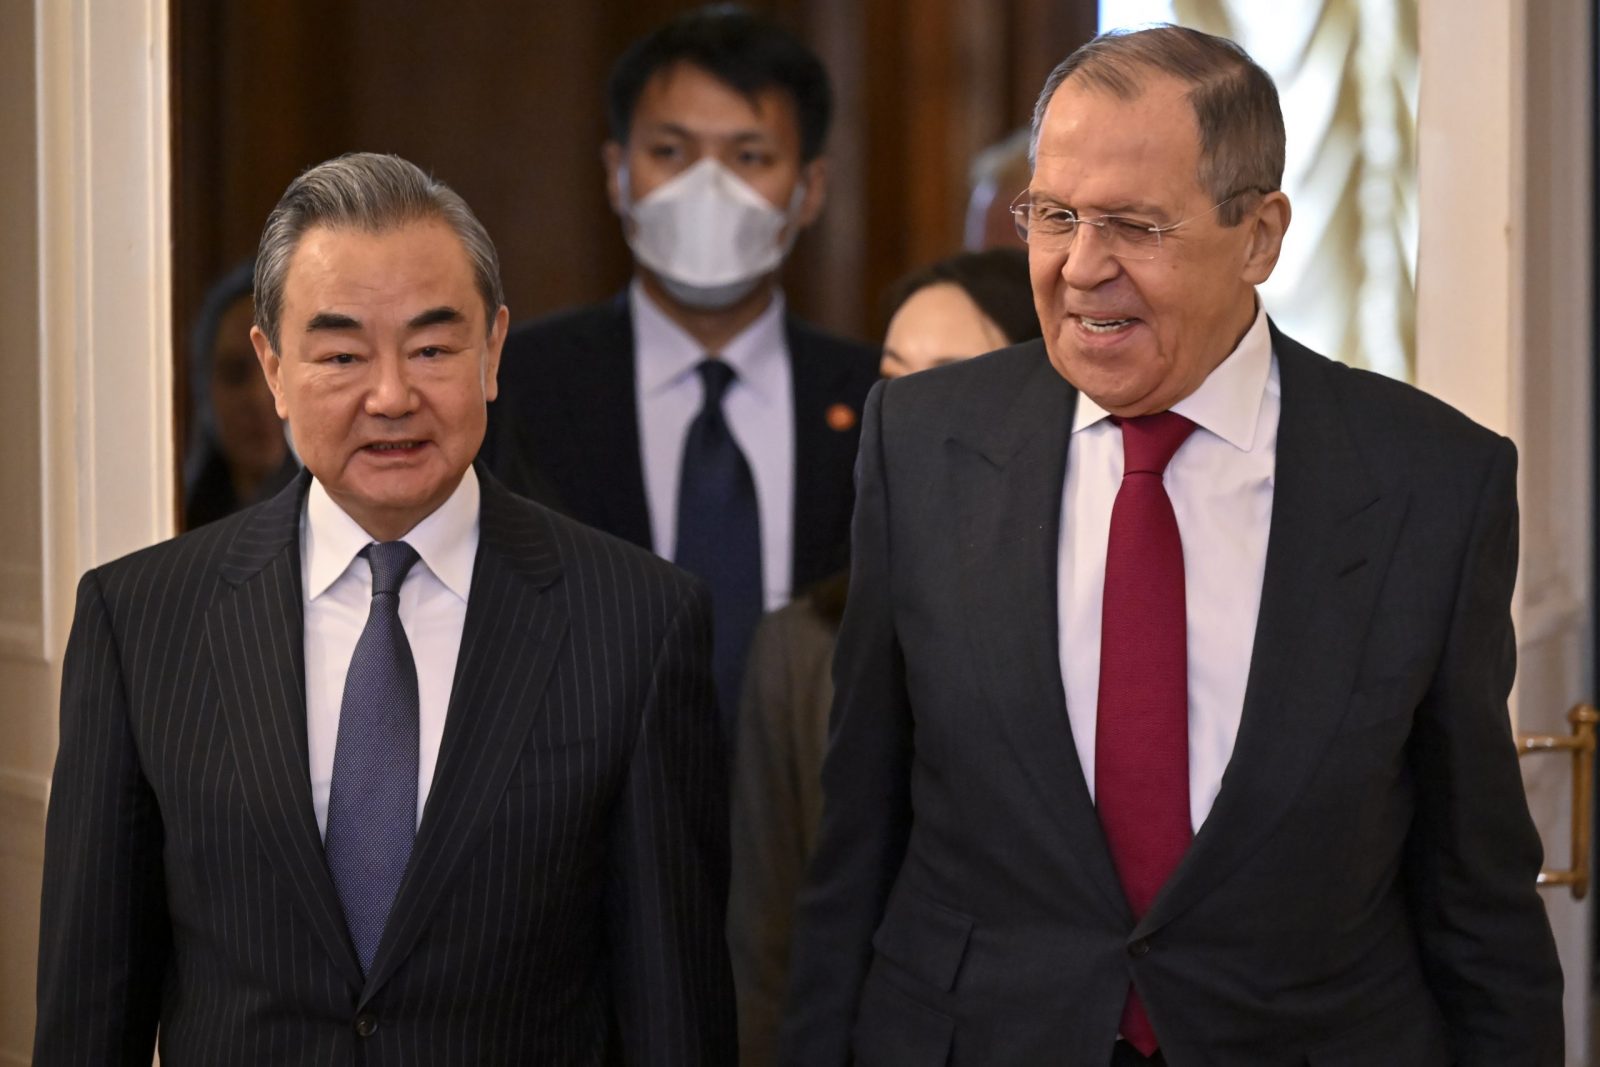 epa10483107 Russian Foreign Minister Sergei Lavrov (R) and China's Director of the Office of the Central Foreign Affairs Commission Wang Yi (L) enter a hall during a meeting in Moscow, Russia, 22 February 2023. Wang Yi arrived in Moscow on 21 February, and engaged in negotiations with the Secretary of the Security Council of the Russian Federation Nikolai Patrushev. At this meeting, Wang Yi stressed that Chinese-Russian relations are 'strong as a rock' and 'will stand the test in the changing international situation.' According to Wang Yi, Beijing is ready, together with Moscow, to resolutely defend national interests and promote mutually beneficial cooperation in all areas.  EPA/ALEXANDER NEMENOV / POOL